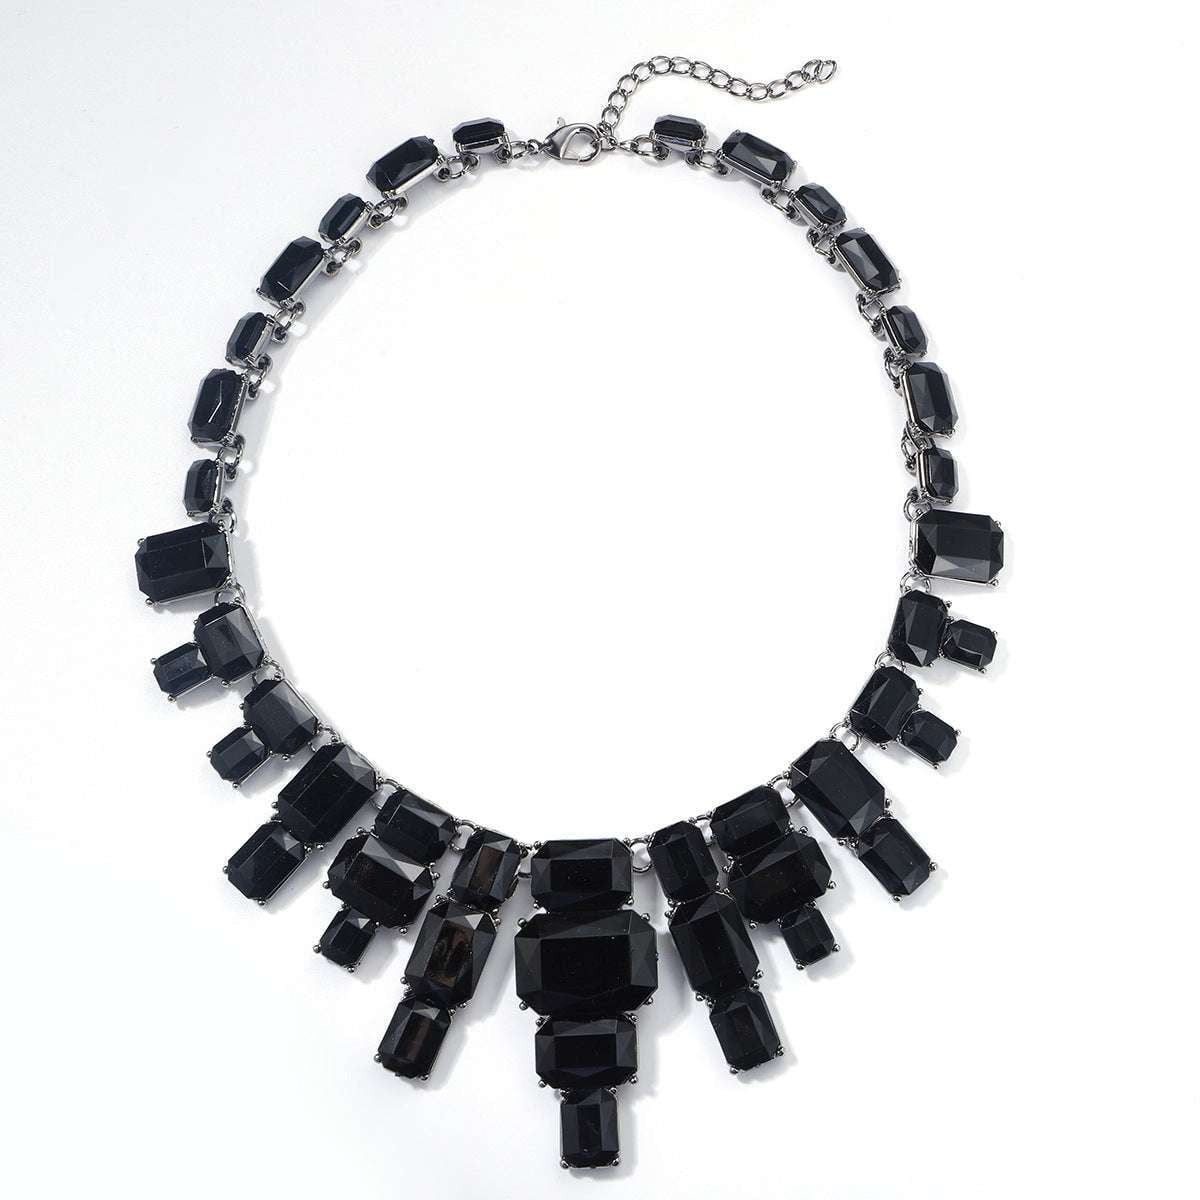 Crystal Statement Necklace, Elegant Crystal Jewelry, High-end Necklace Jewelry - available at Sparq Mart